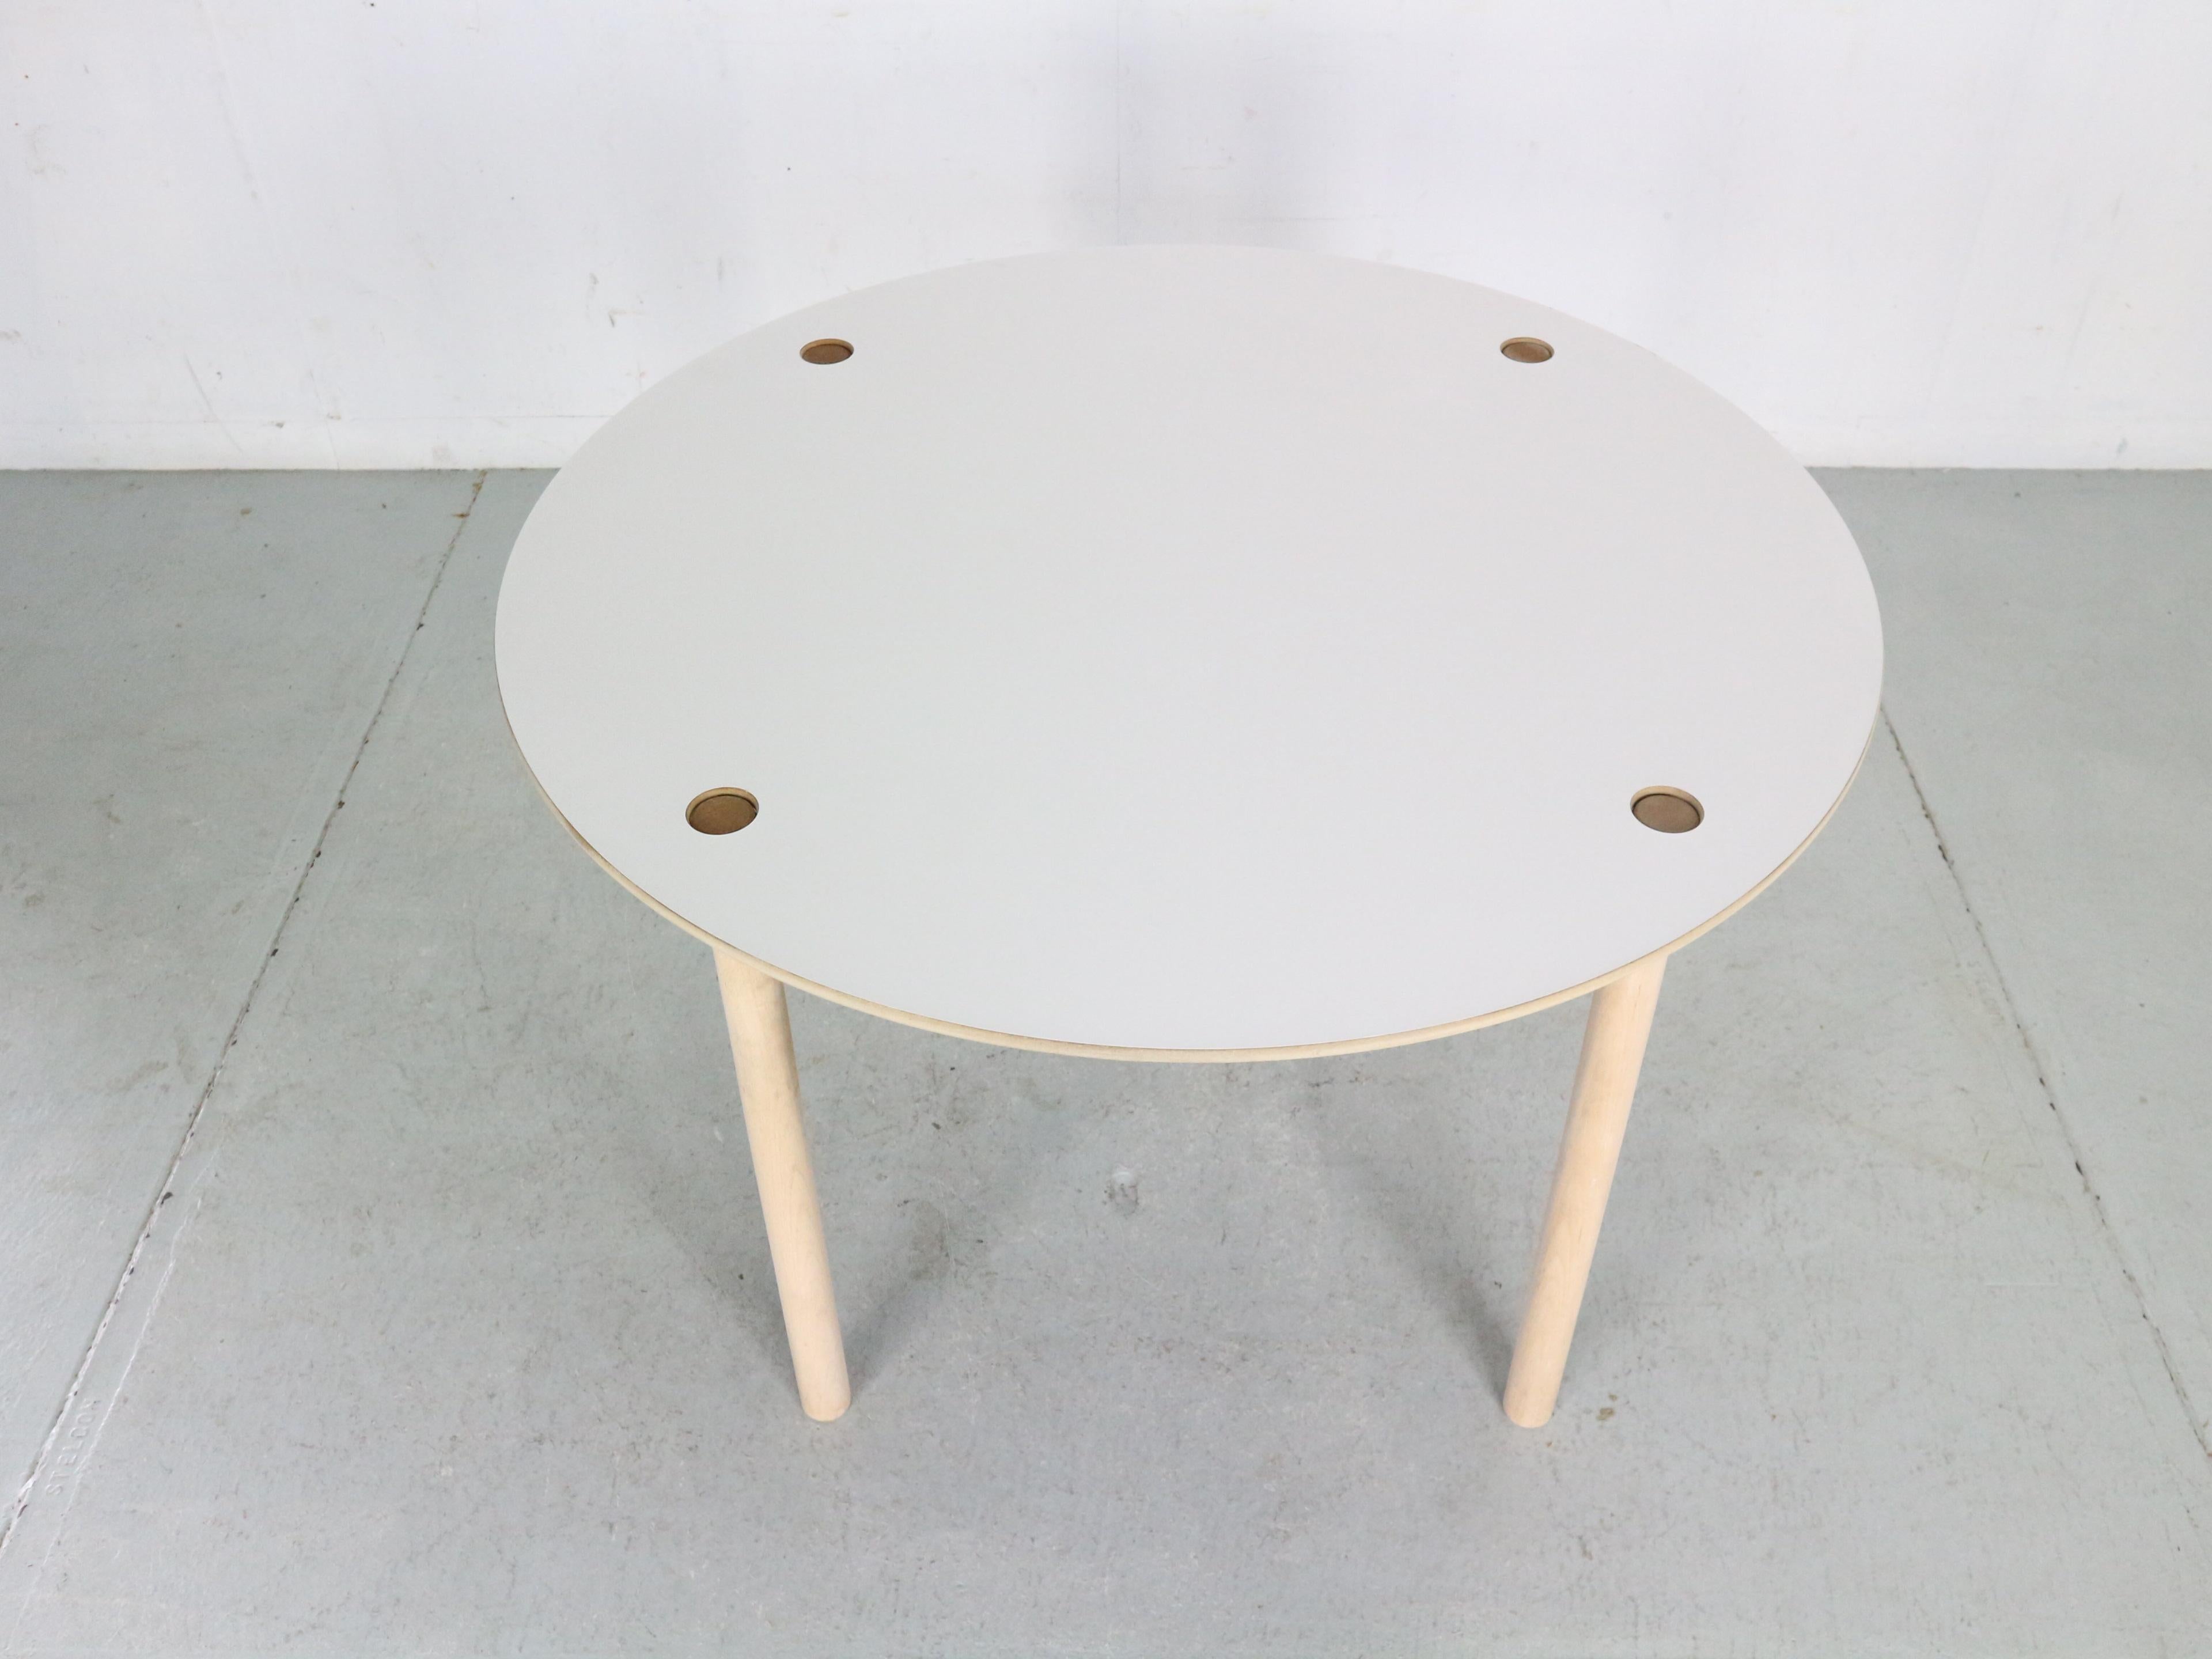 Mid-Century Modern period very unique flip-top round dinning table designed by famous Danish furniture designer Børge Mogensen and manufactured by FDB Møbler in 1950's circa.

The table is made of solid oak wood and the flip-top is finished with